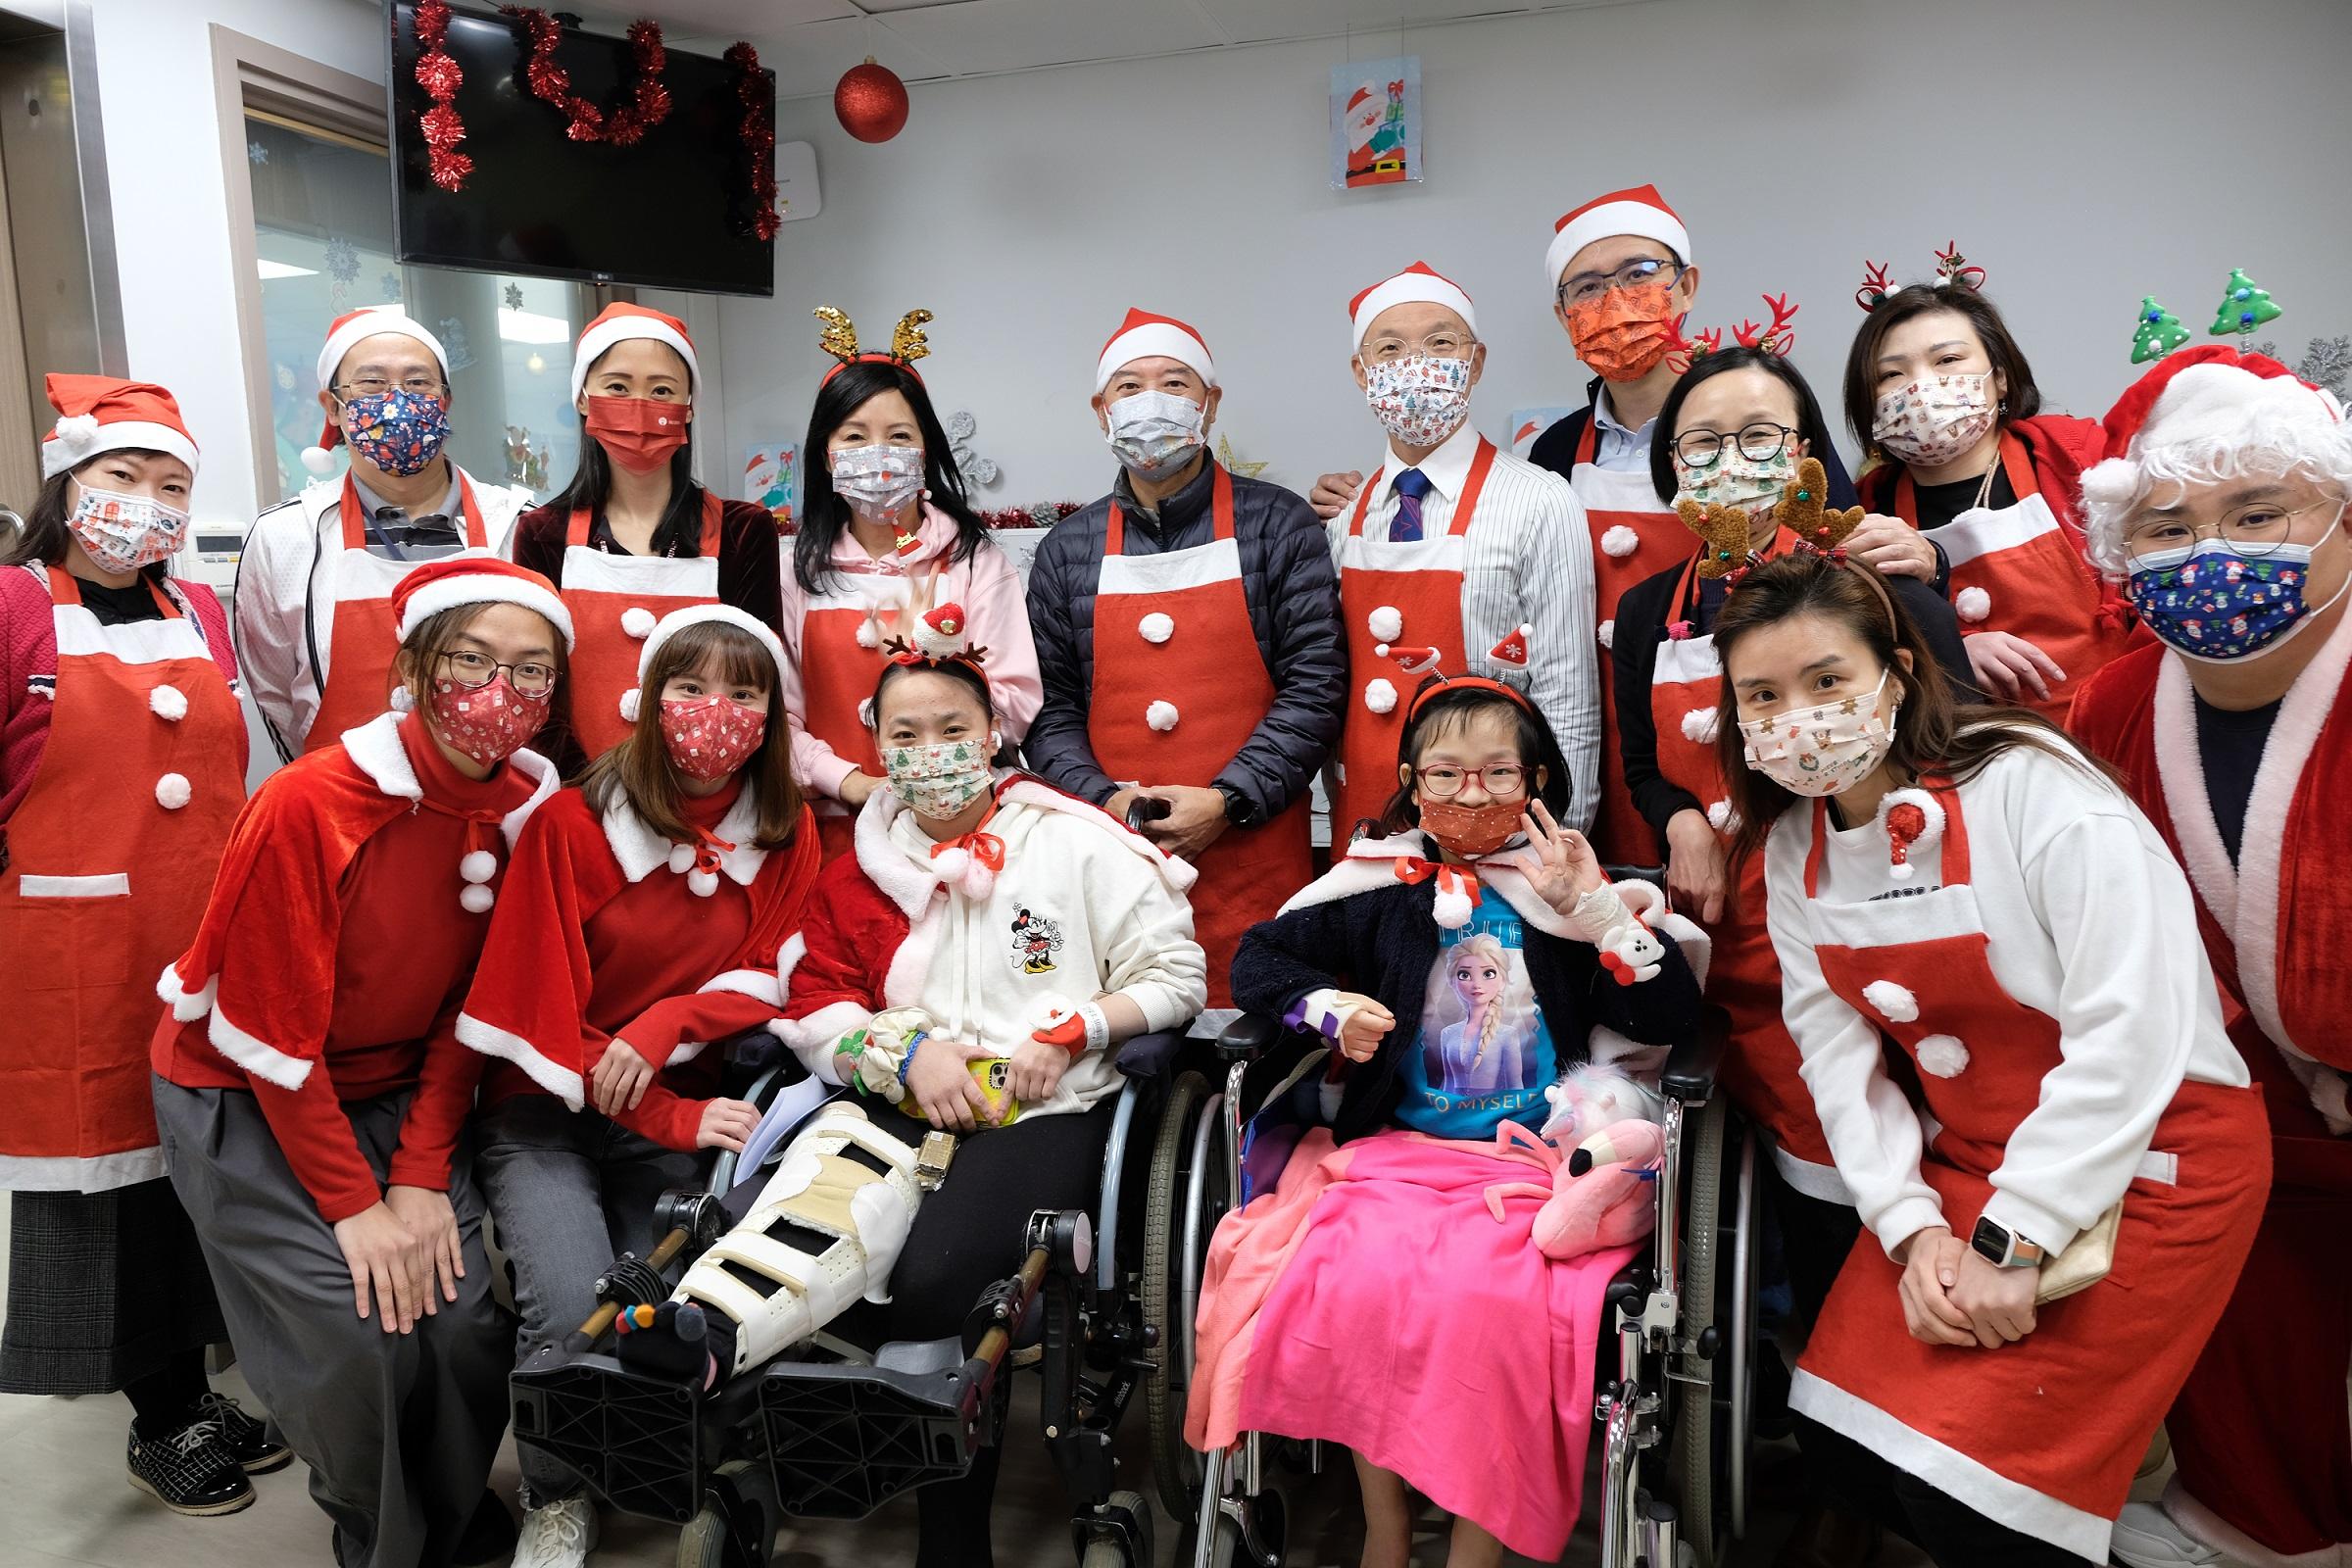 The Duchess of Kent Children's Hospital at Sandy Bay arranged various Christmas activities for the children to let them enjoy the happiness of festive season in hospital.